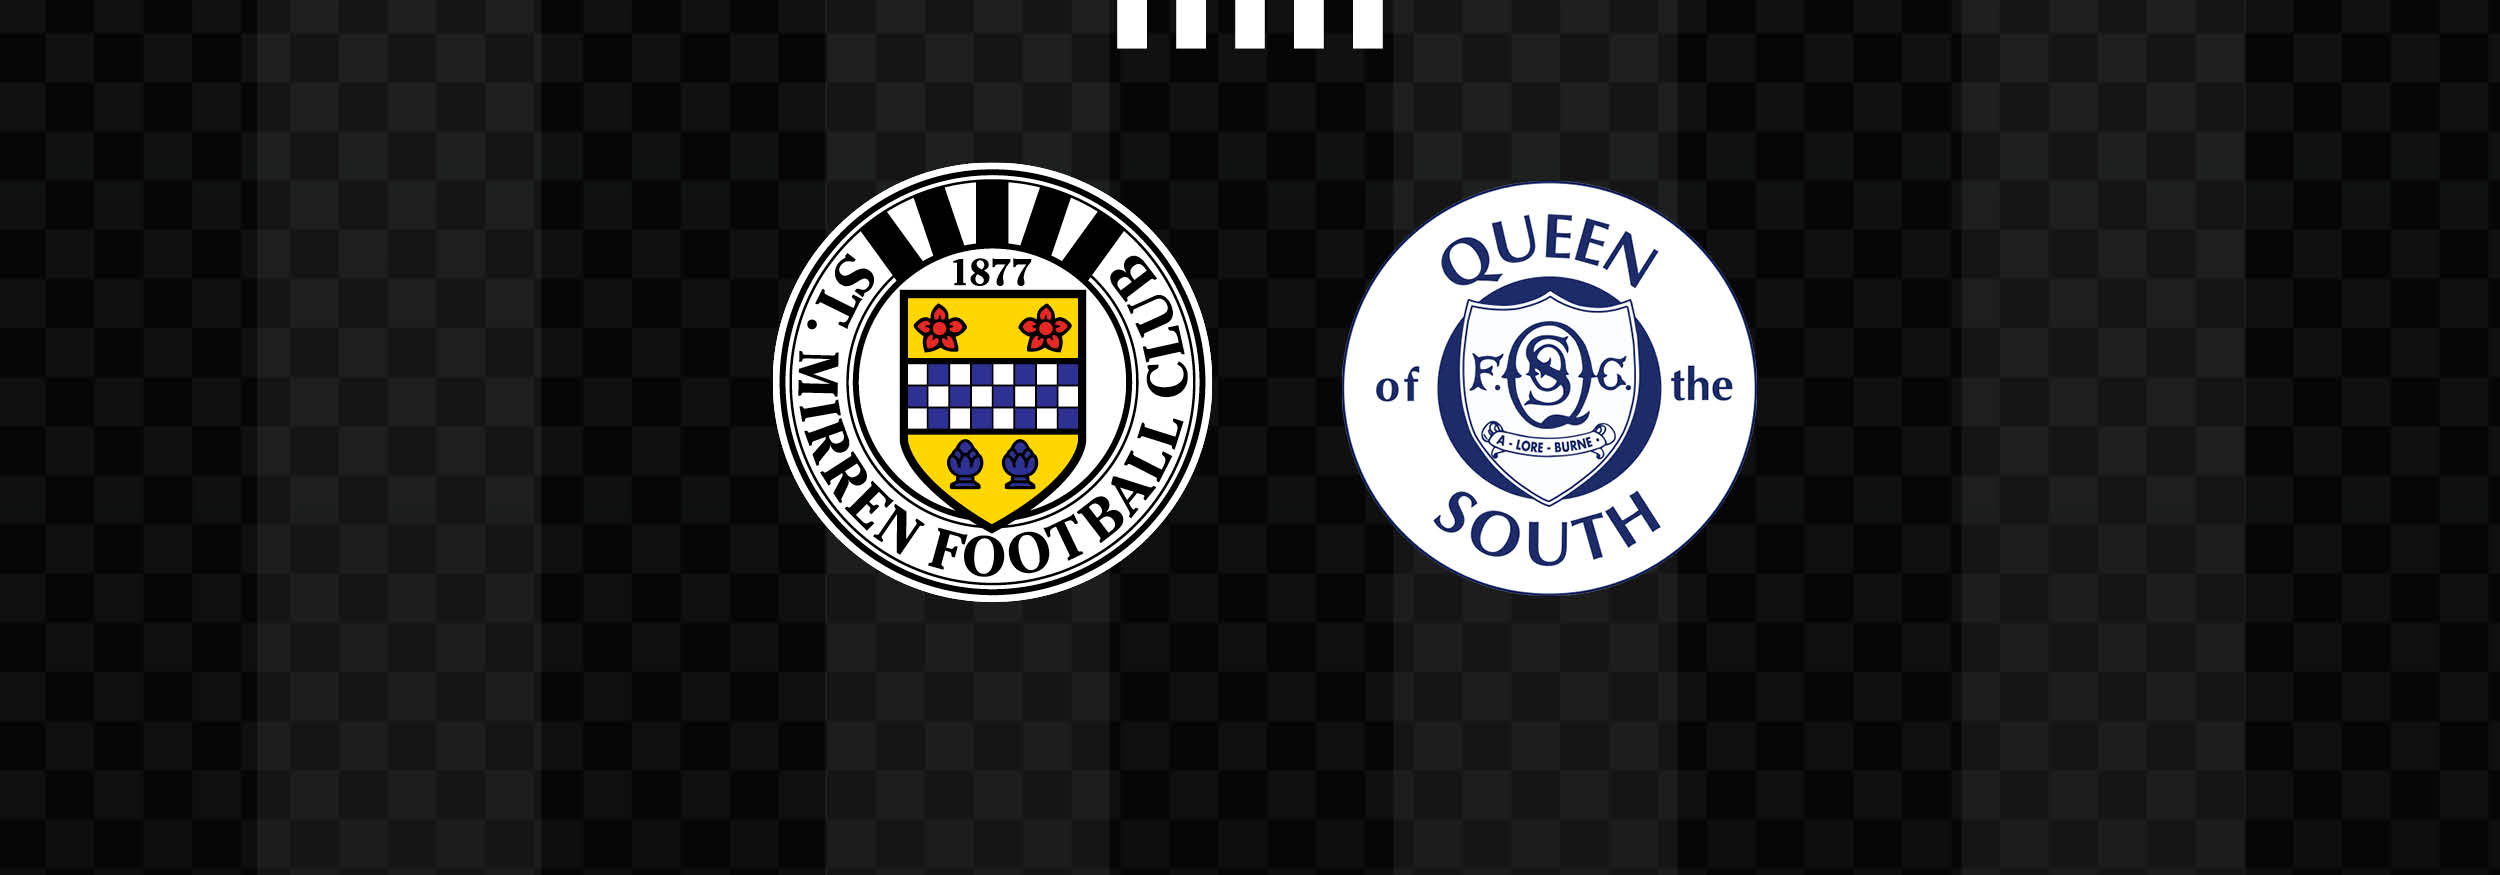 St Mirren to face Queen of the South at home in Scottish Cup